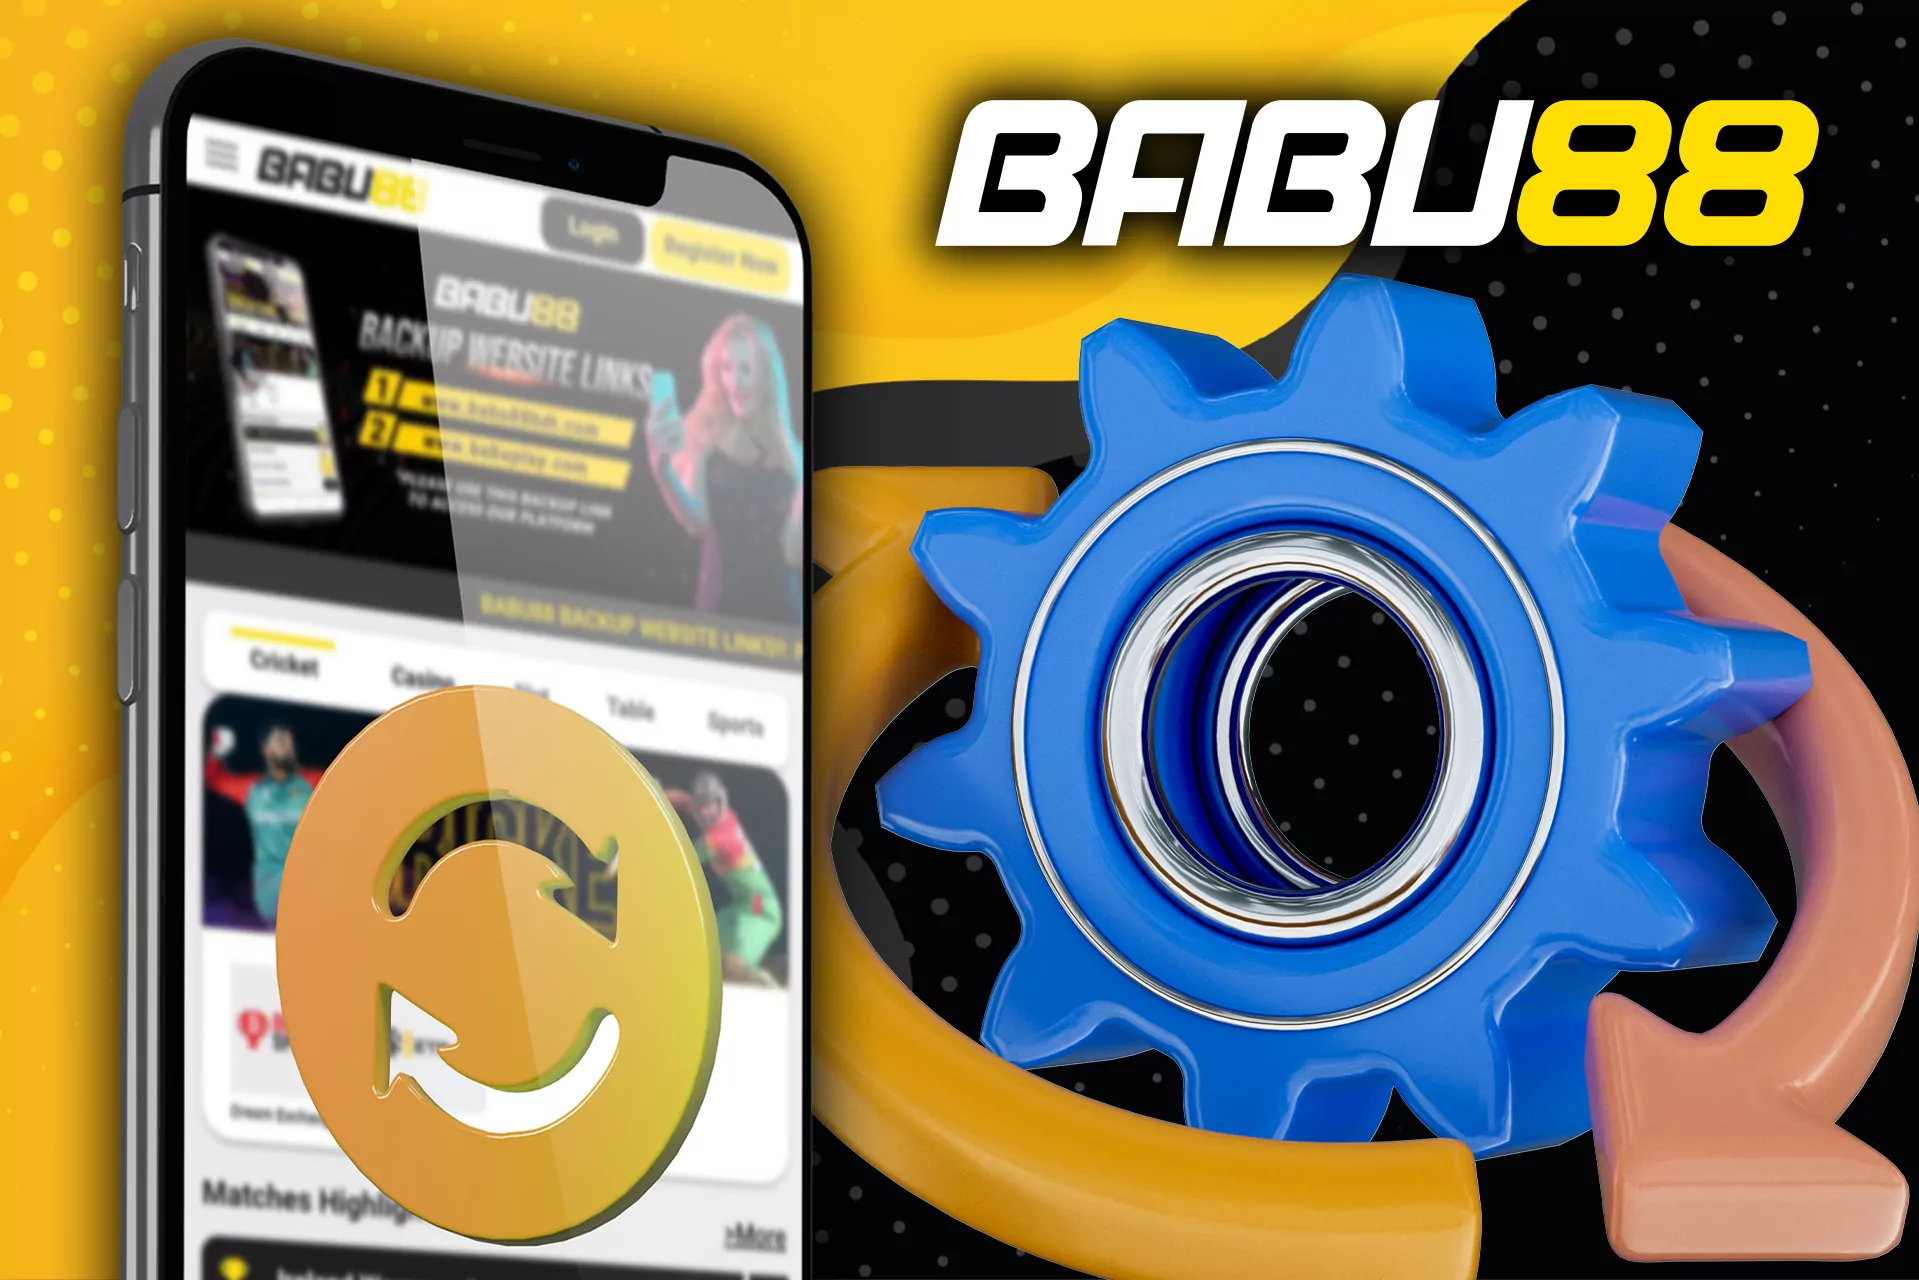 Keep Babu88 app updated to get access to the new bonuses and features.